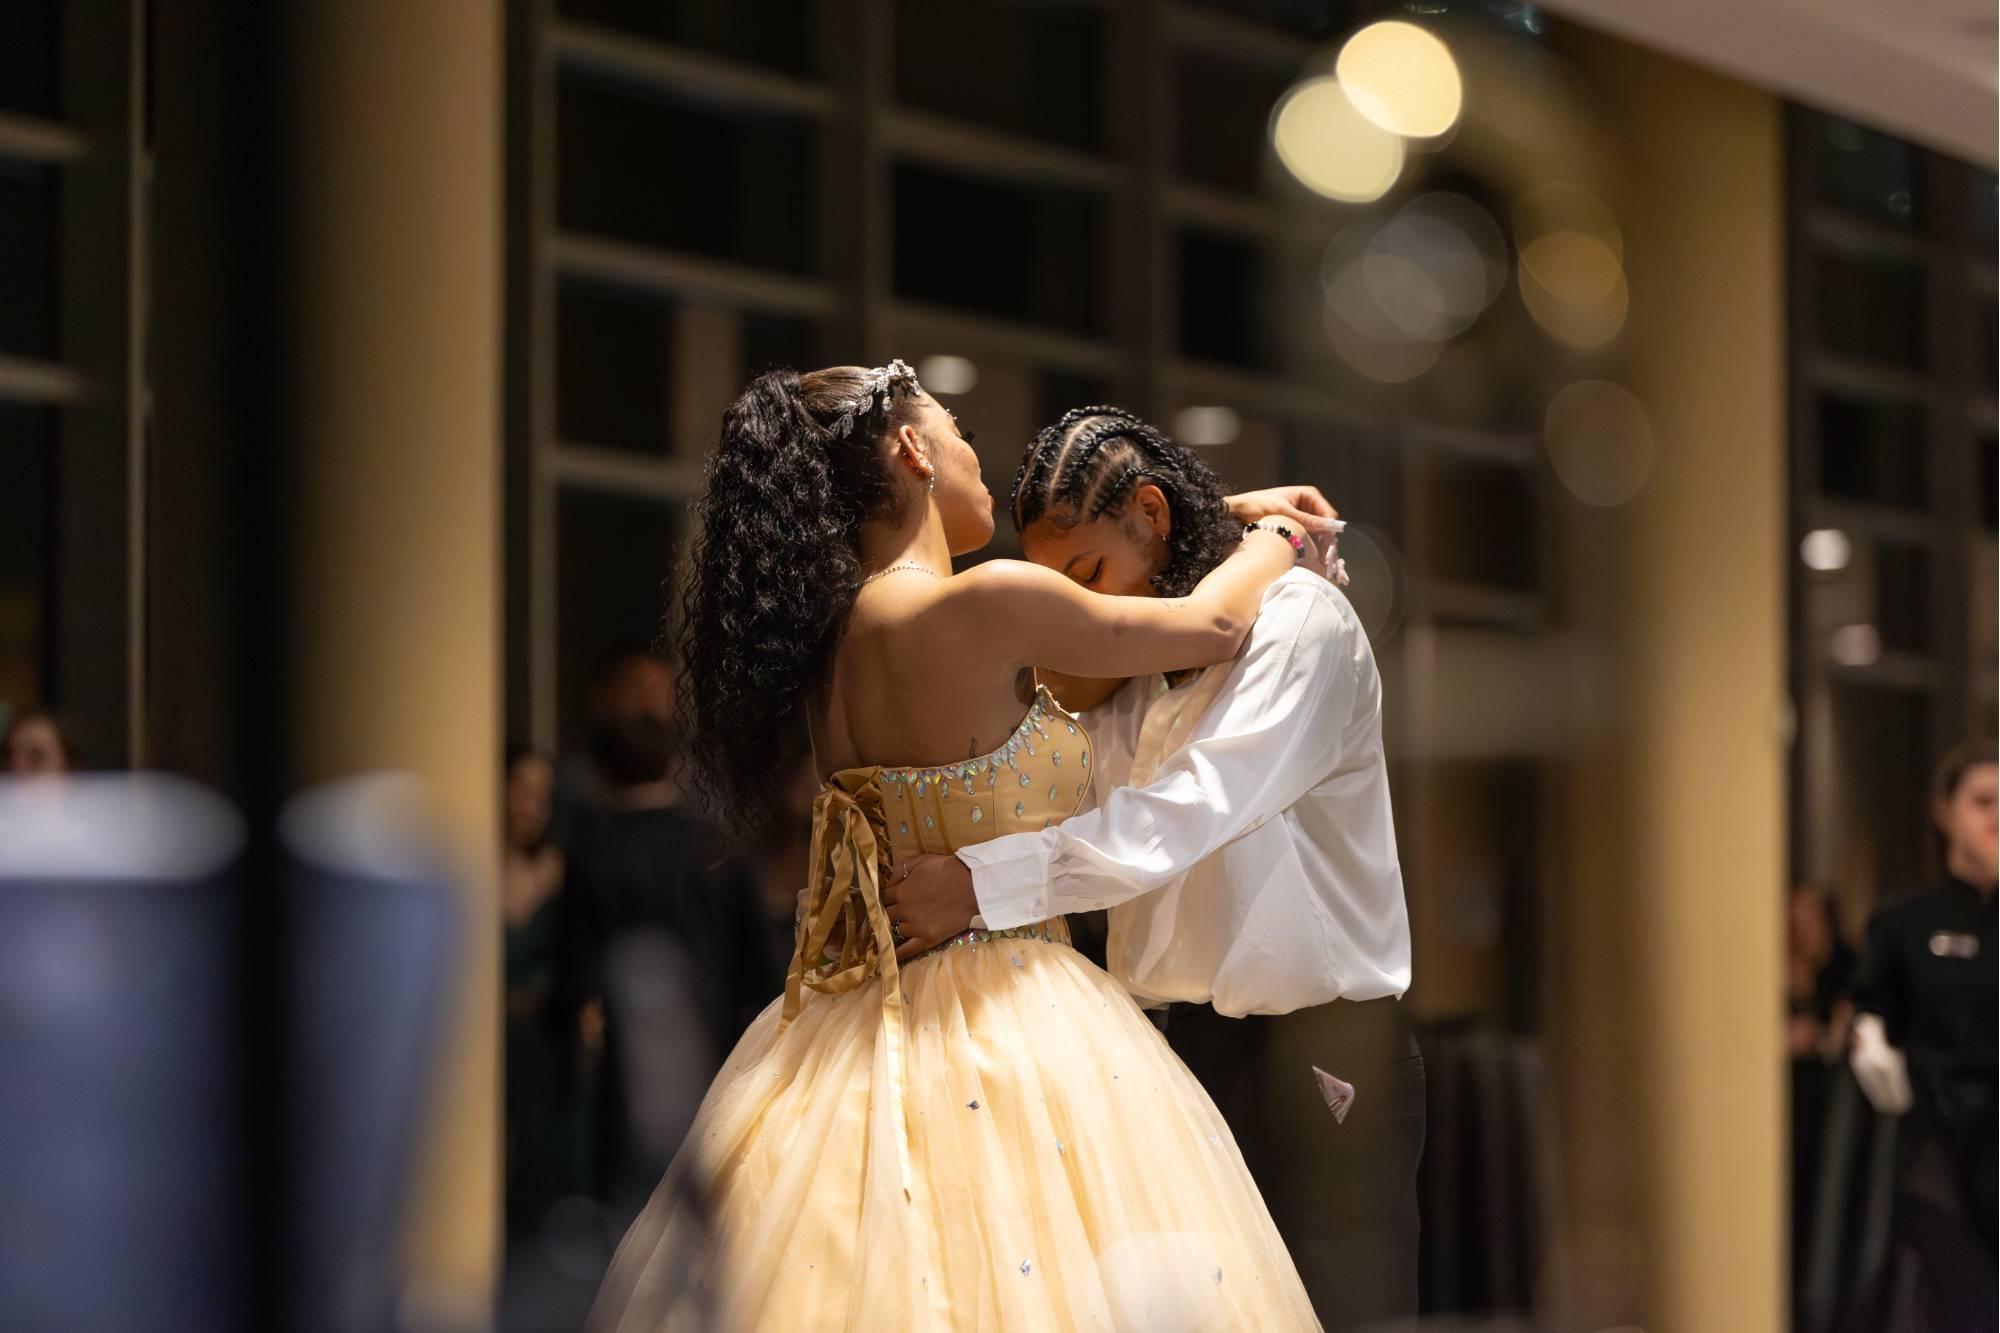 Two people dancing together at Presidents' Ball